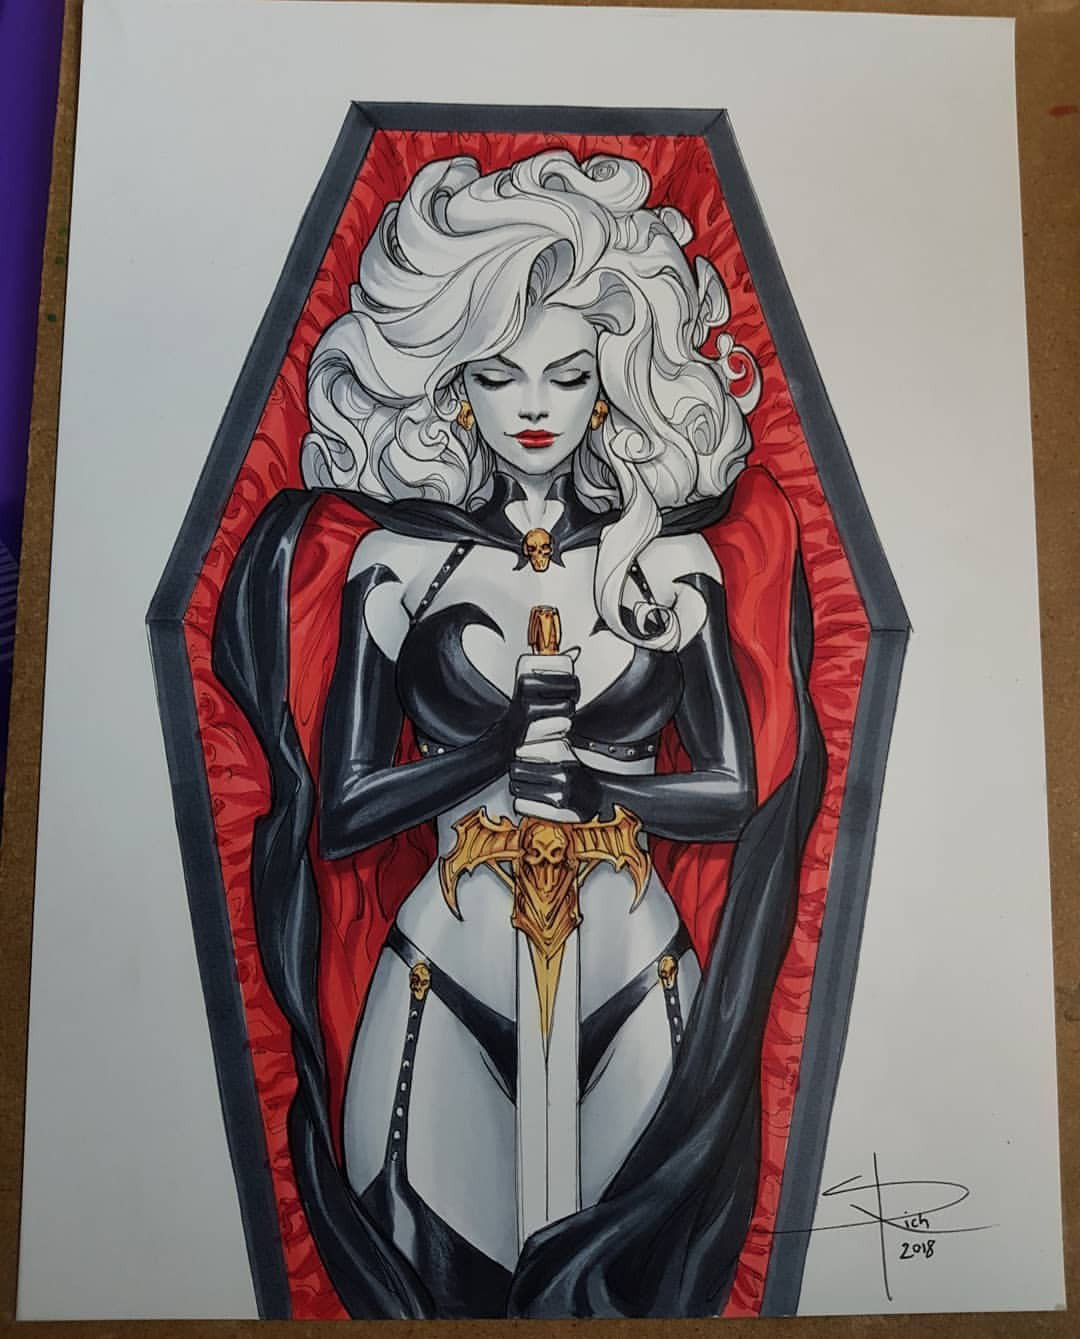 Photo by Justanotherguy with the username @Justanotherguy79,  August 5, 2018 at 11:03 PM and the text says 'sabinerich:

Lady Death commission done at Fantasy Basel. Even Lady Death needs her beauty sleep.  #commission #ladydeath @ladydeathofficial #coffincomics #coffin #copics #draw #sabinerich  (at Basel, Switzerland)'